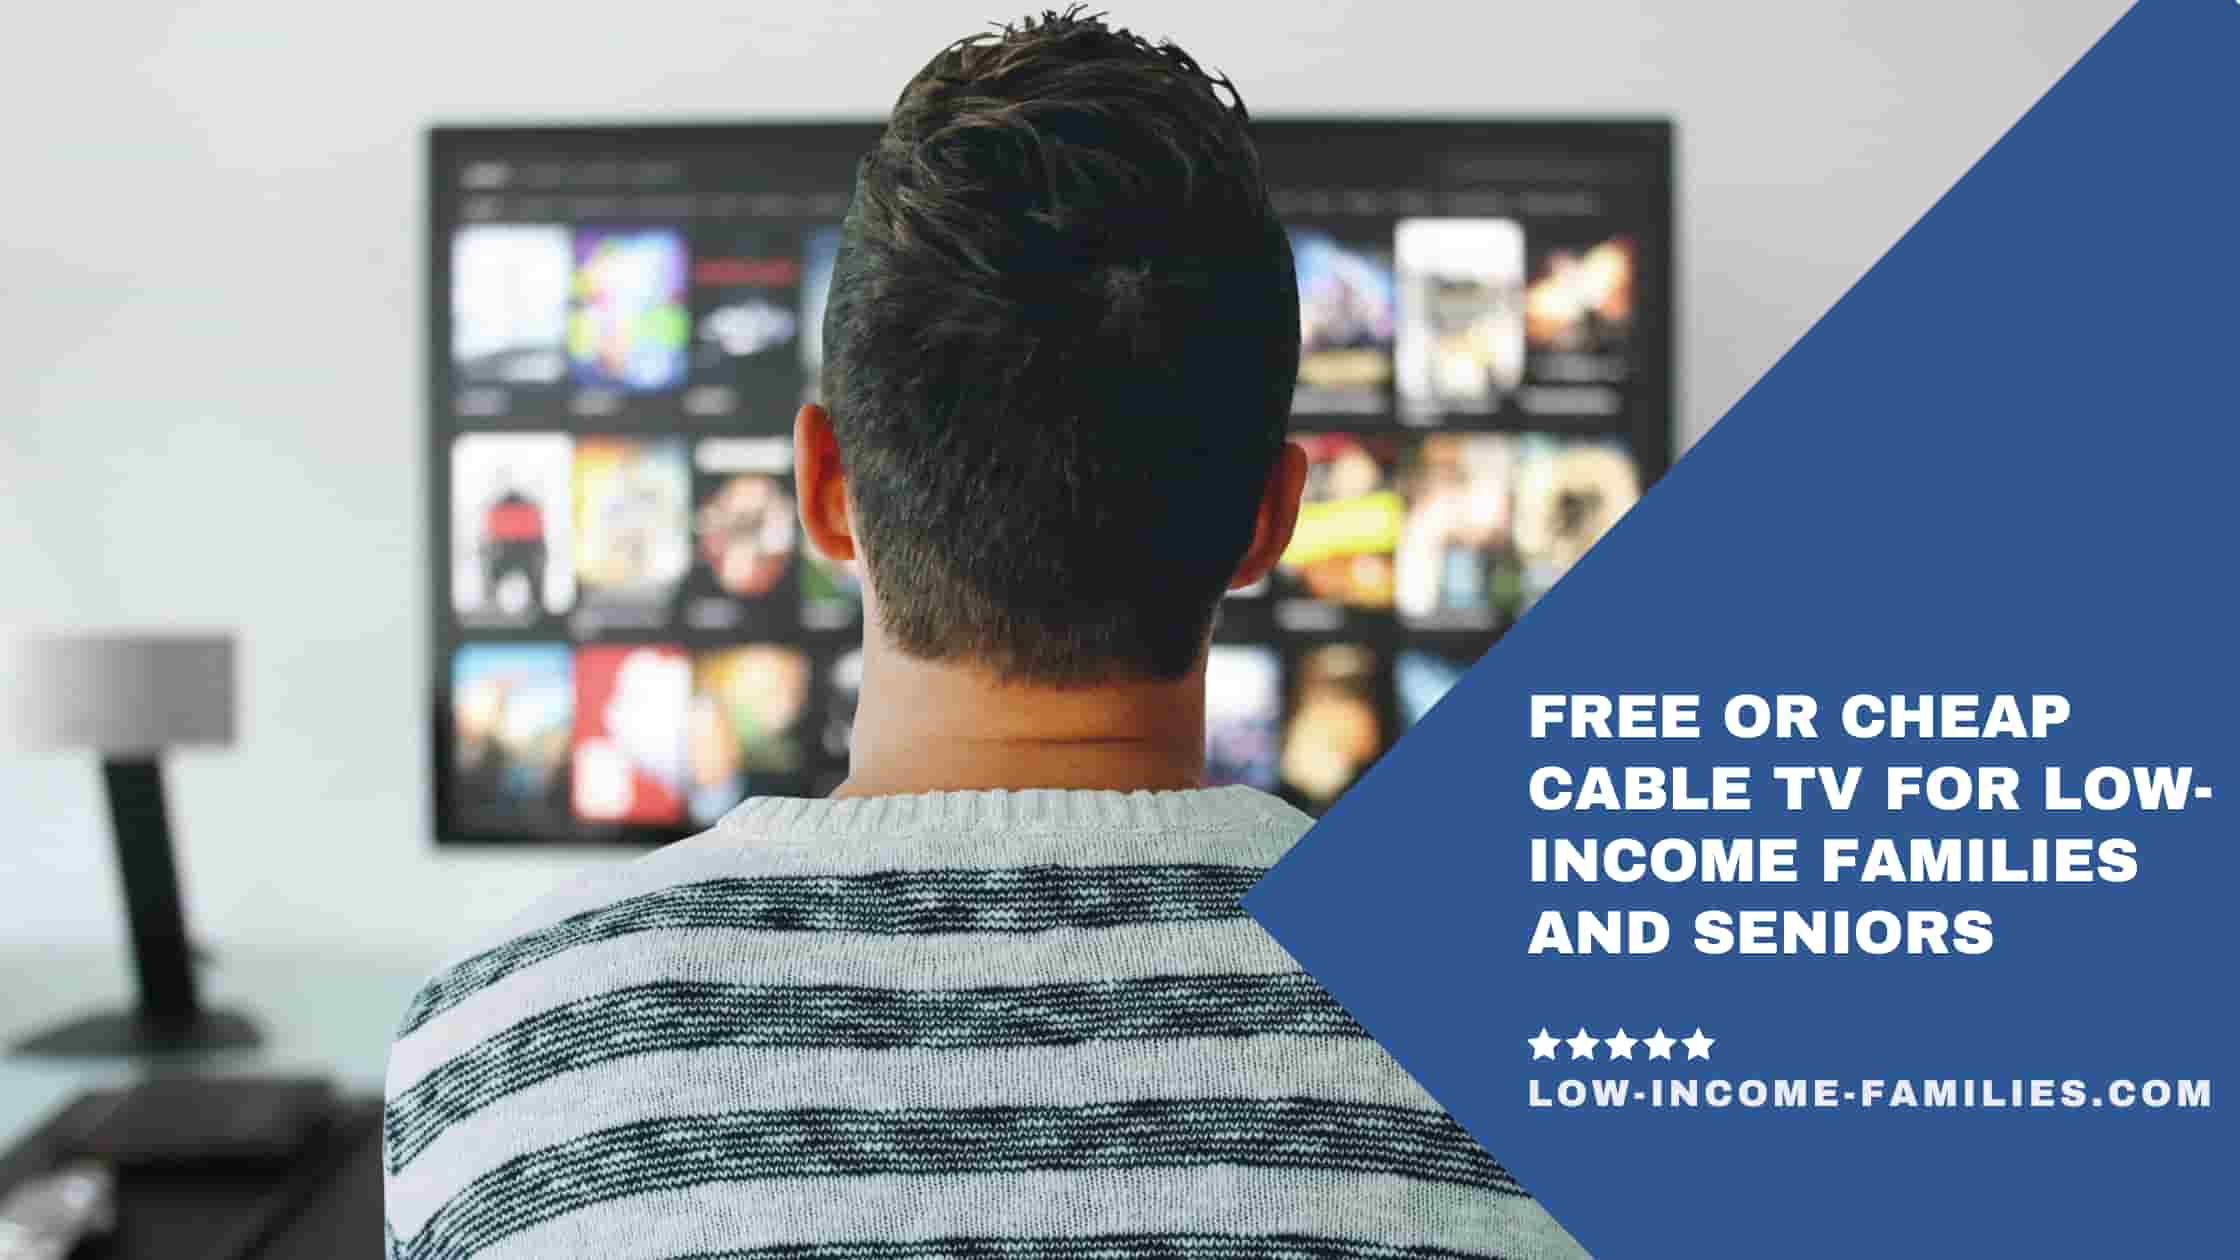 Free or Cheap Cable TV for Low-Income Families and Seniors